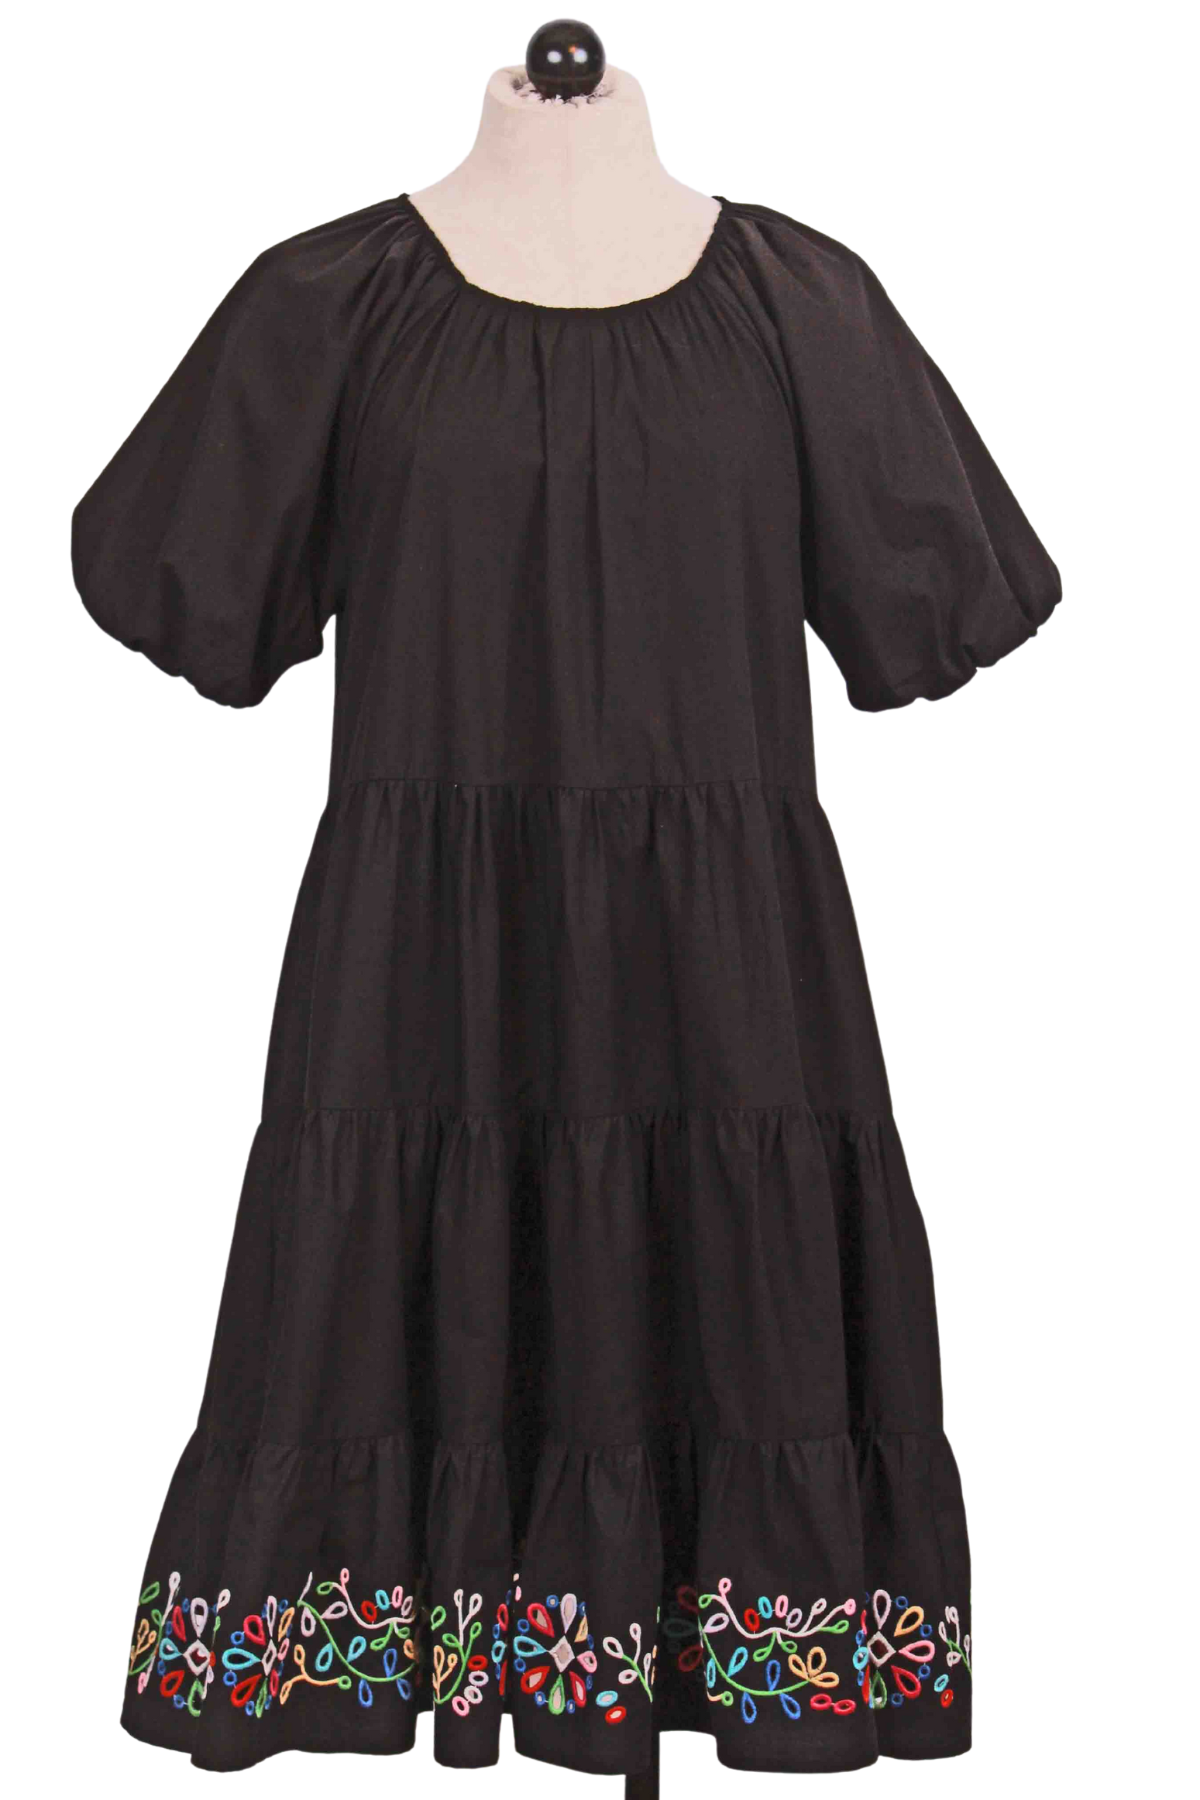 Black Amanza Tiered Dress by Johnny Was with embroidered hem